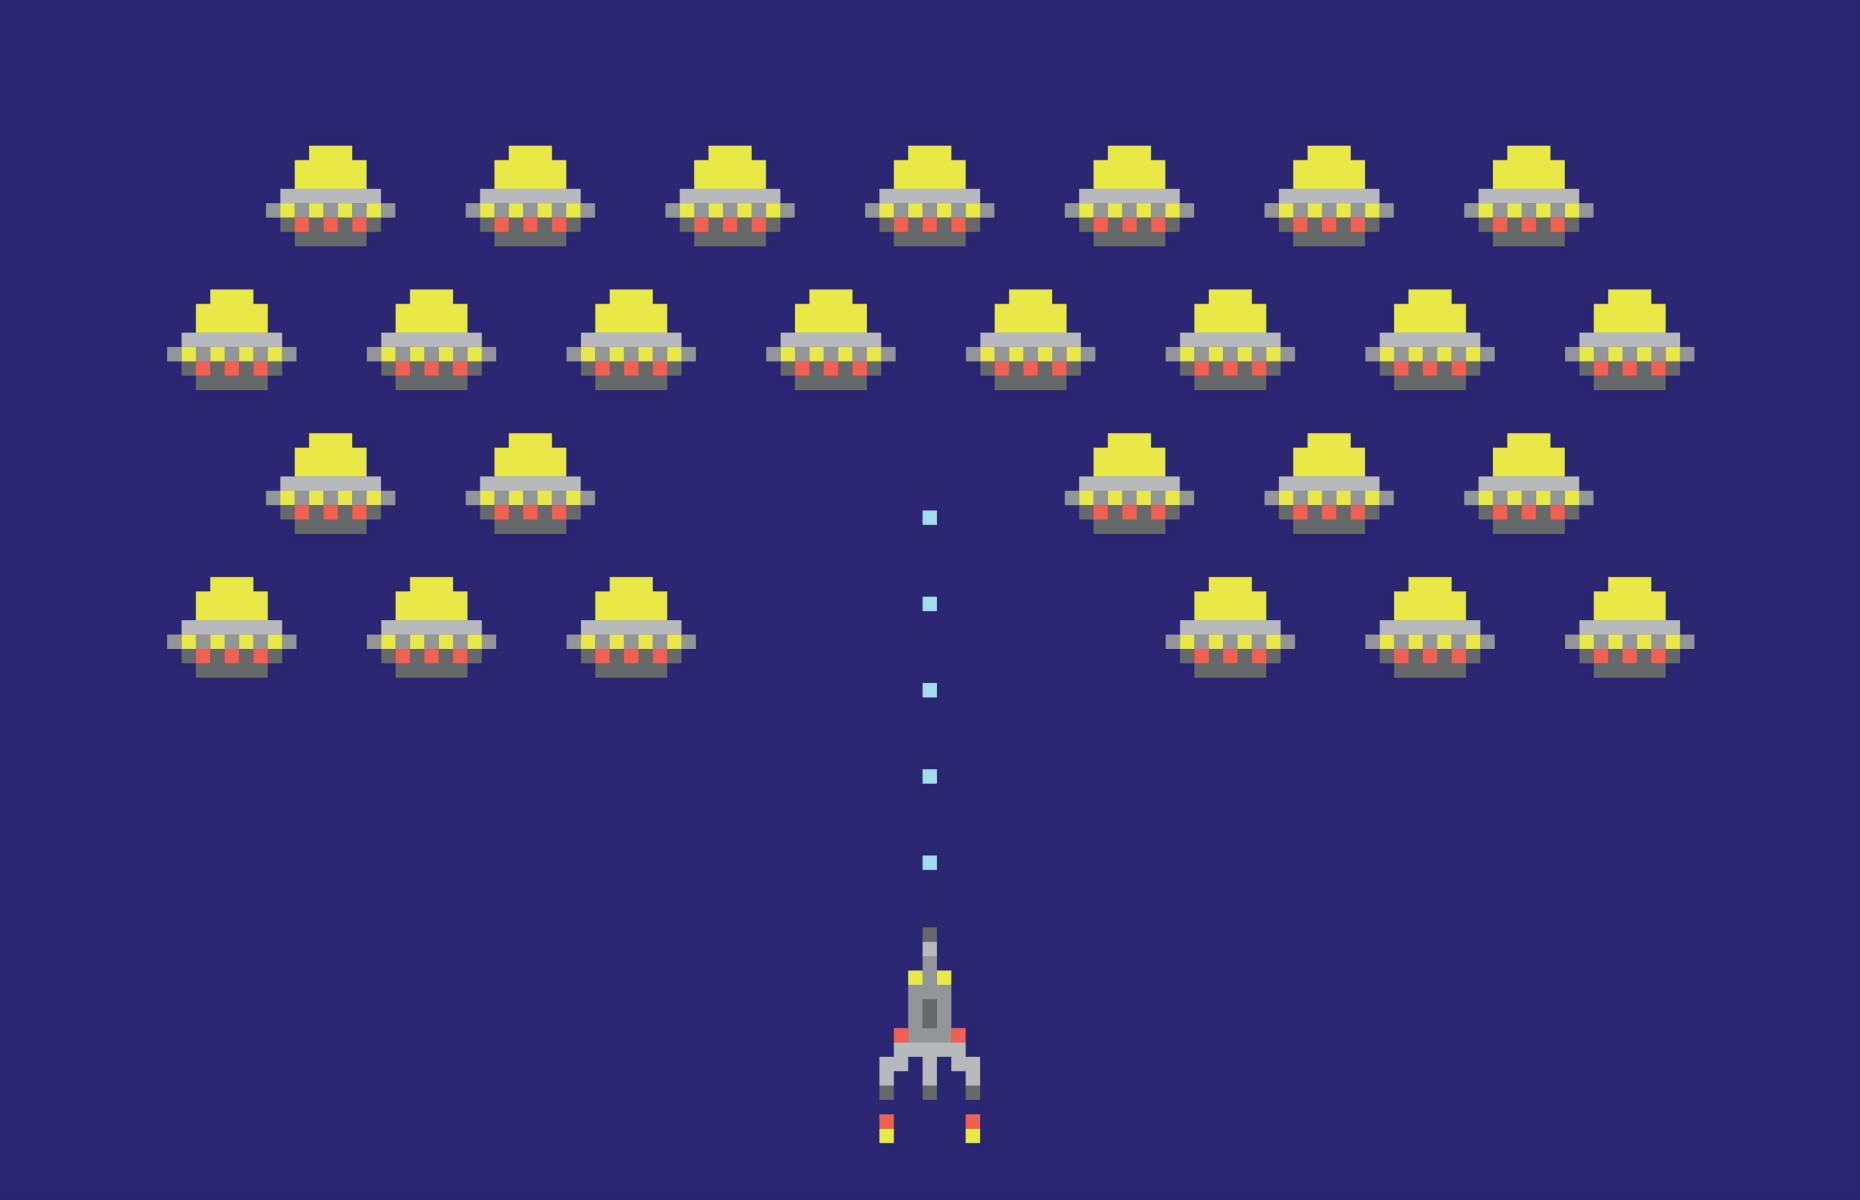 1978: Space Invaders launches